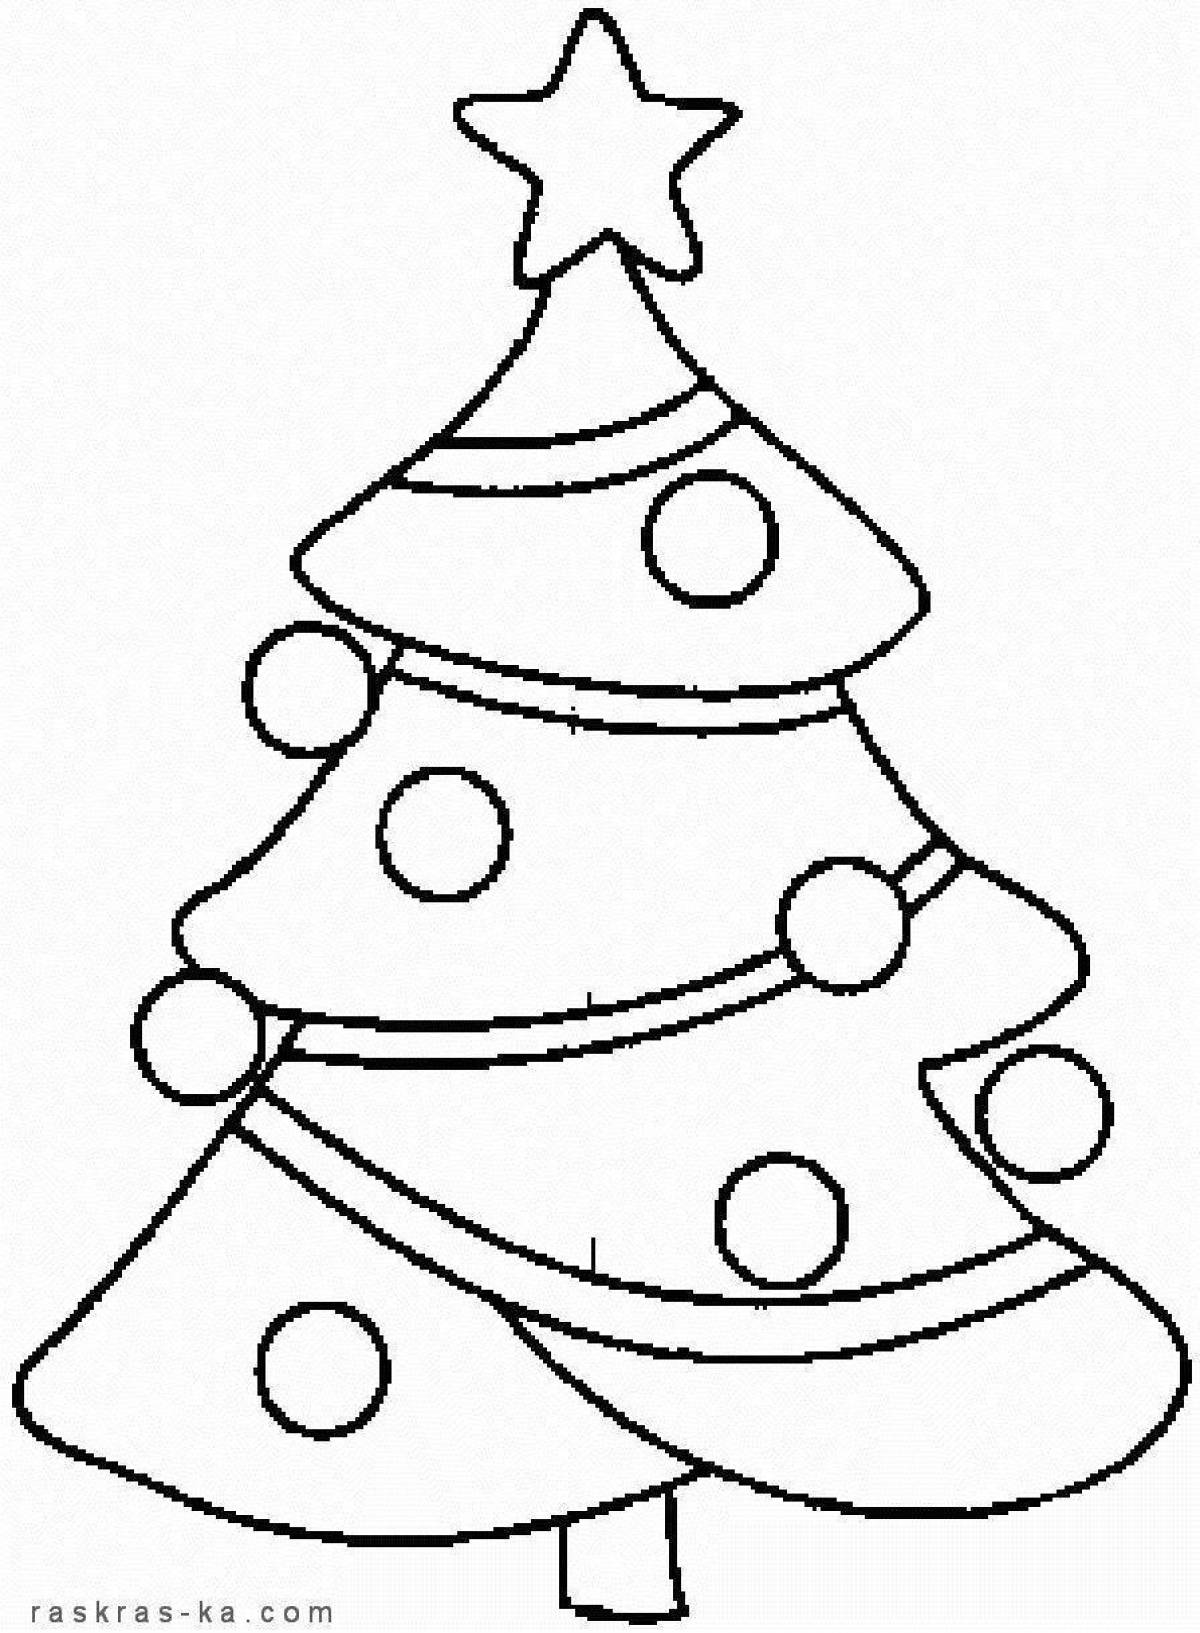 A playful Christmas tree coloring page for 5-6 year olds